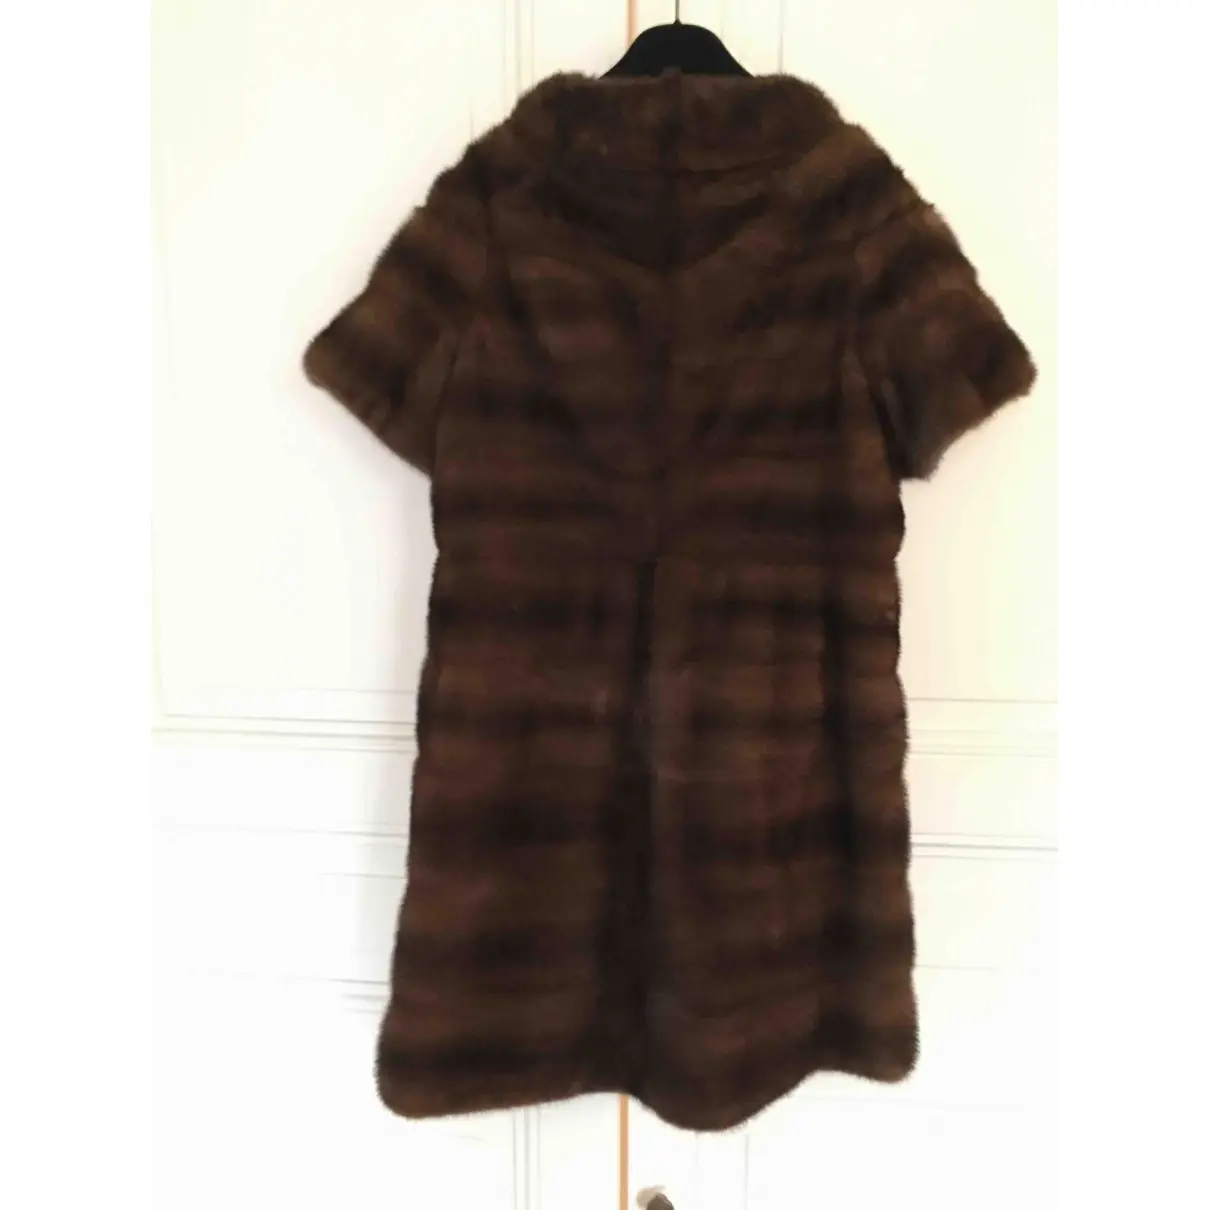 Sam Rone Mink coat for sale